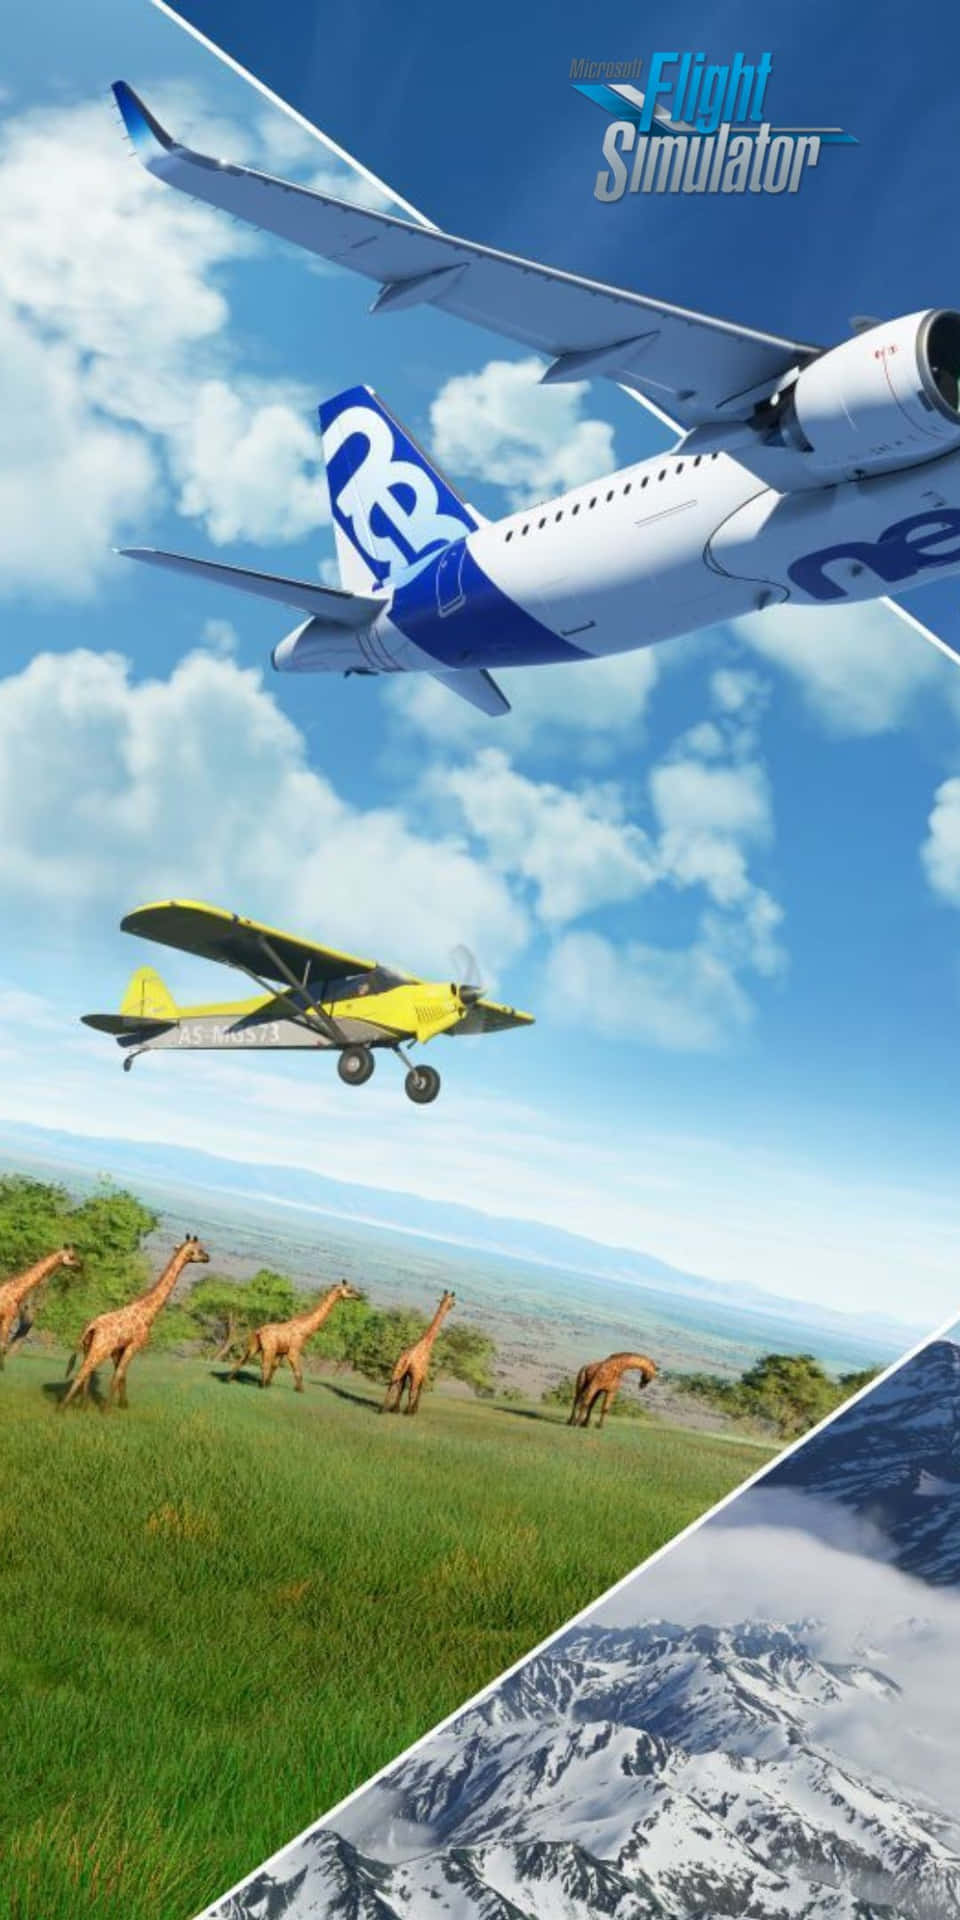 Take to the skies with Microsoft Flight Simulator on the Pixel 3